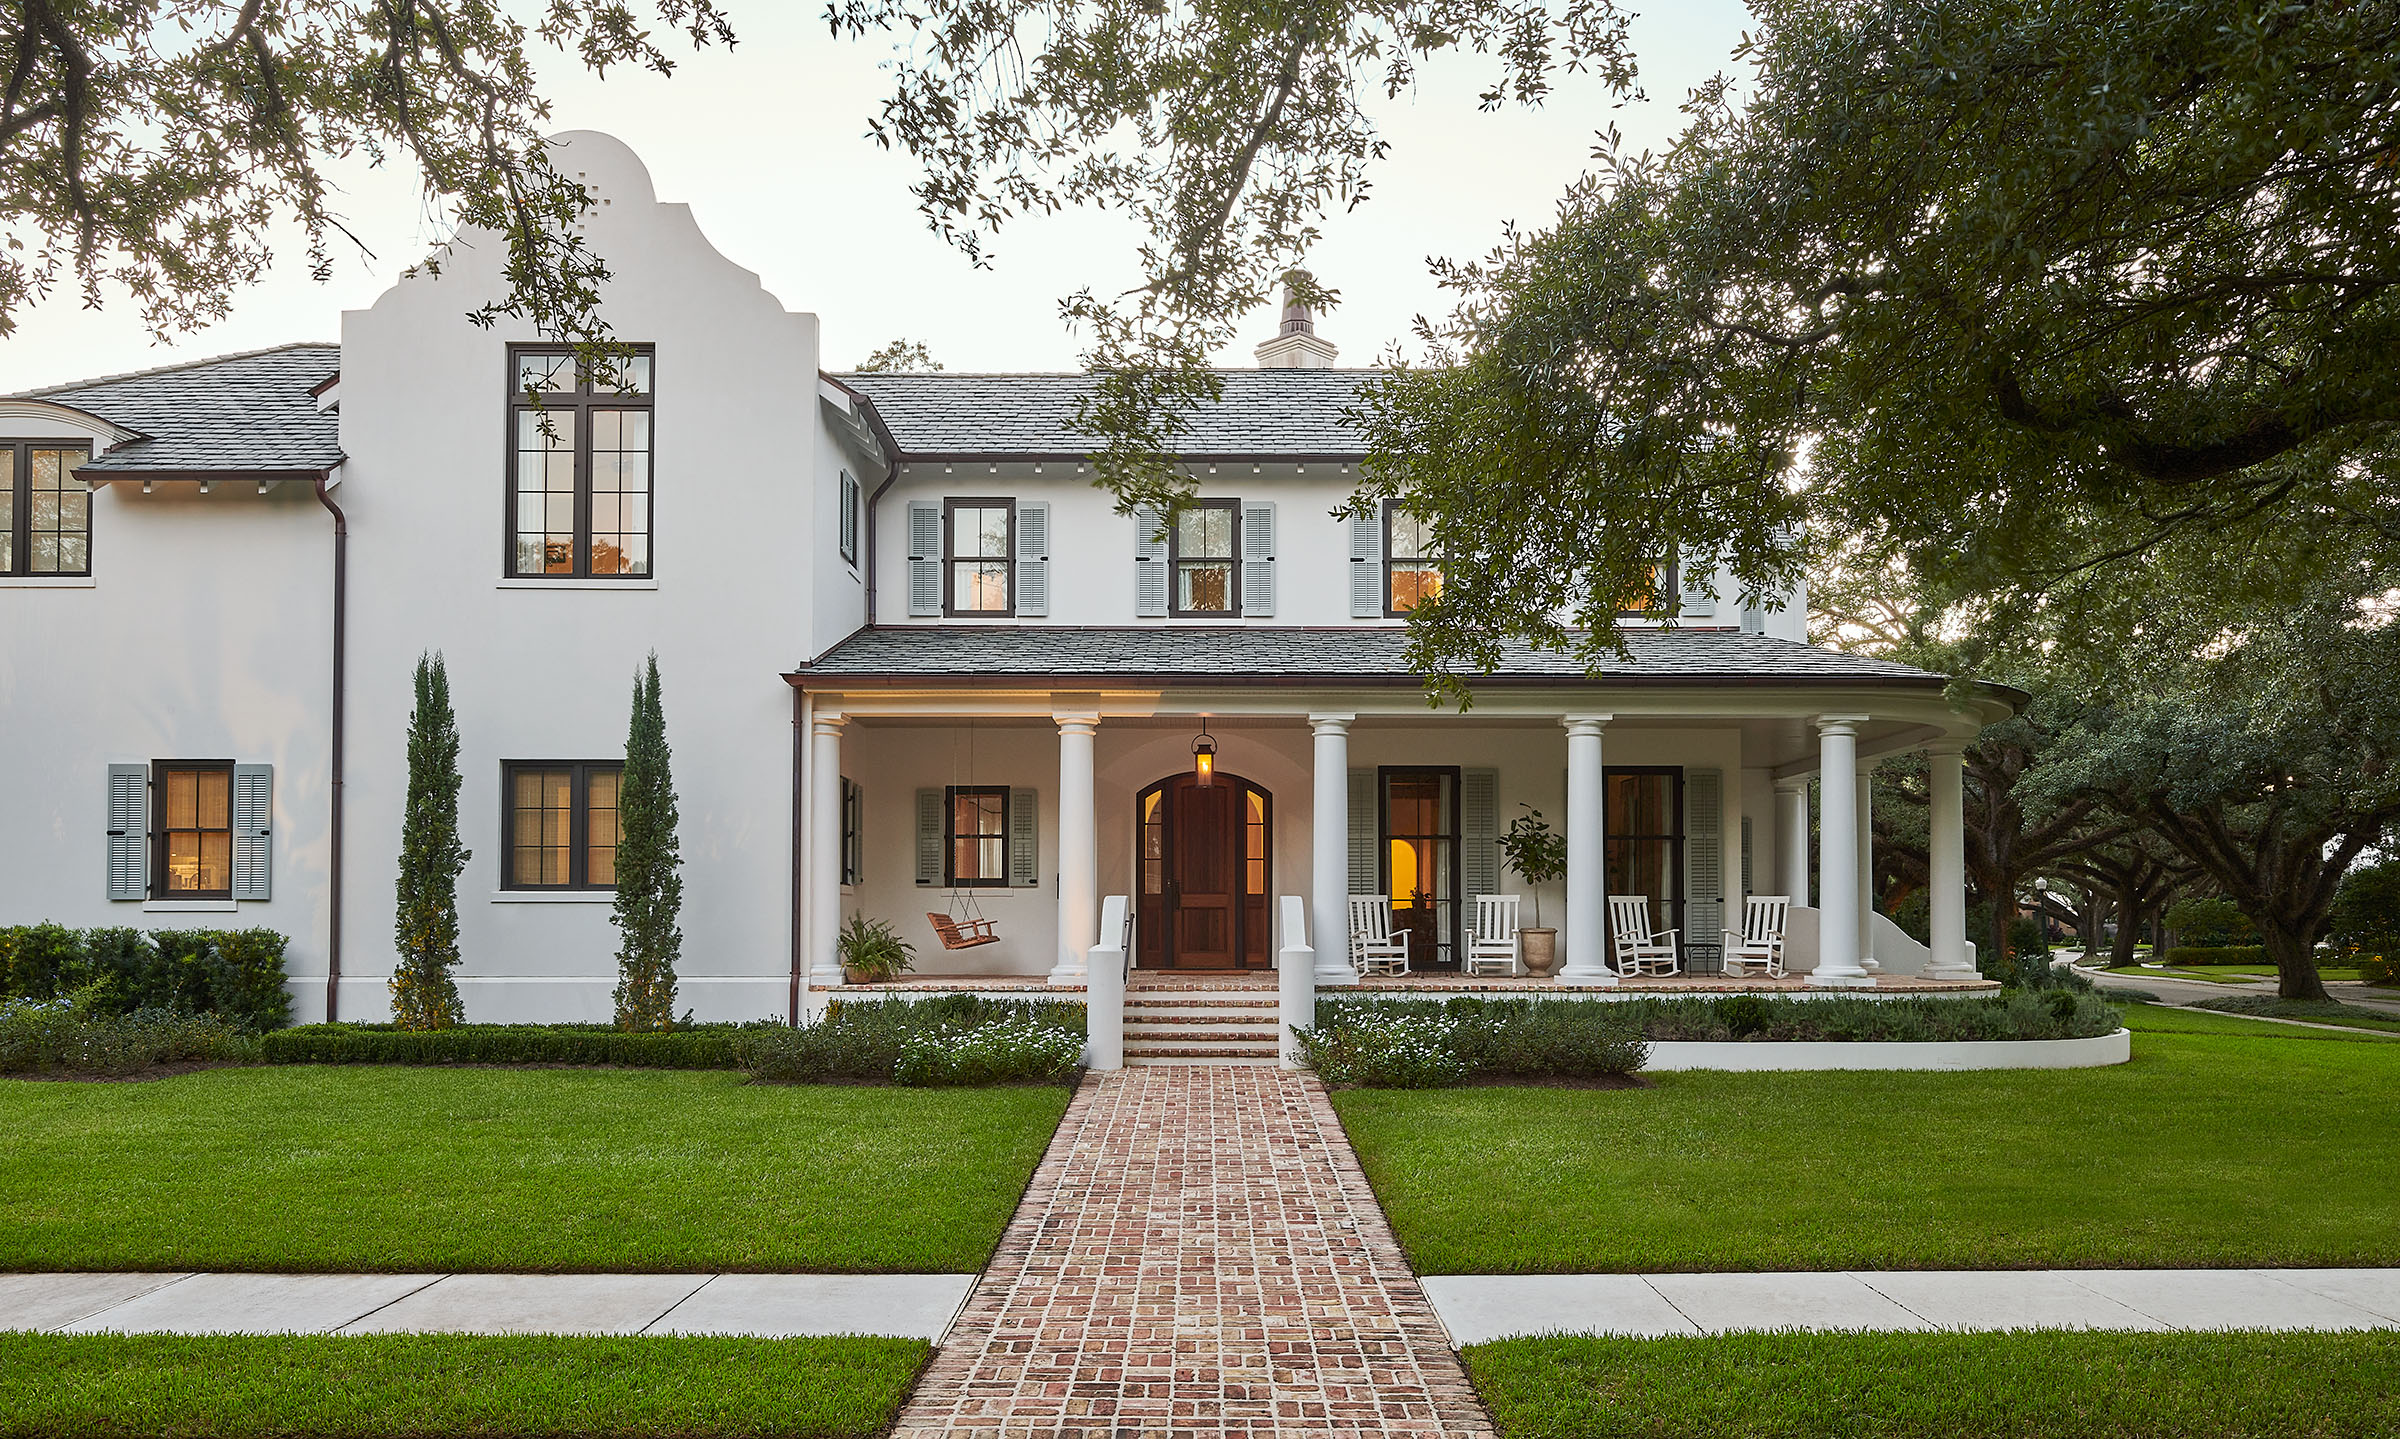 Exterior of white house with live oak trees and brick walkway and porch by Alison Gootee Photography for Logan Killen Interiors and BellArchitects